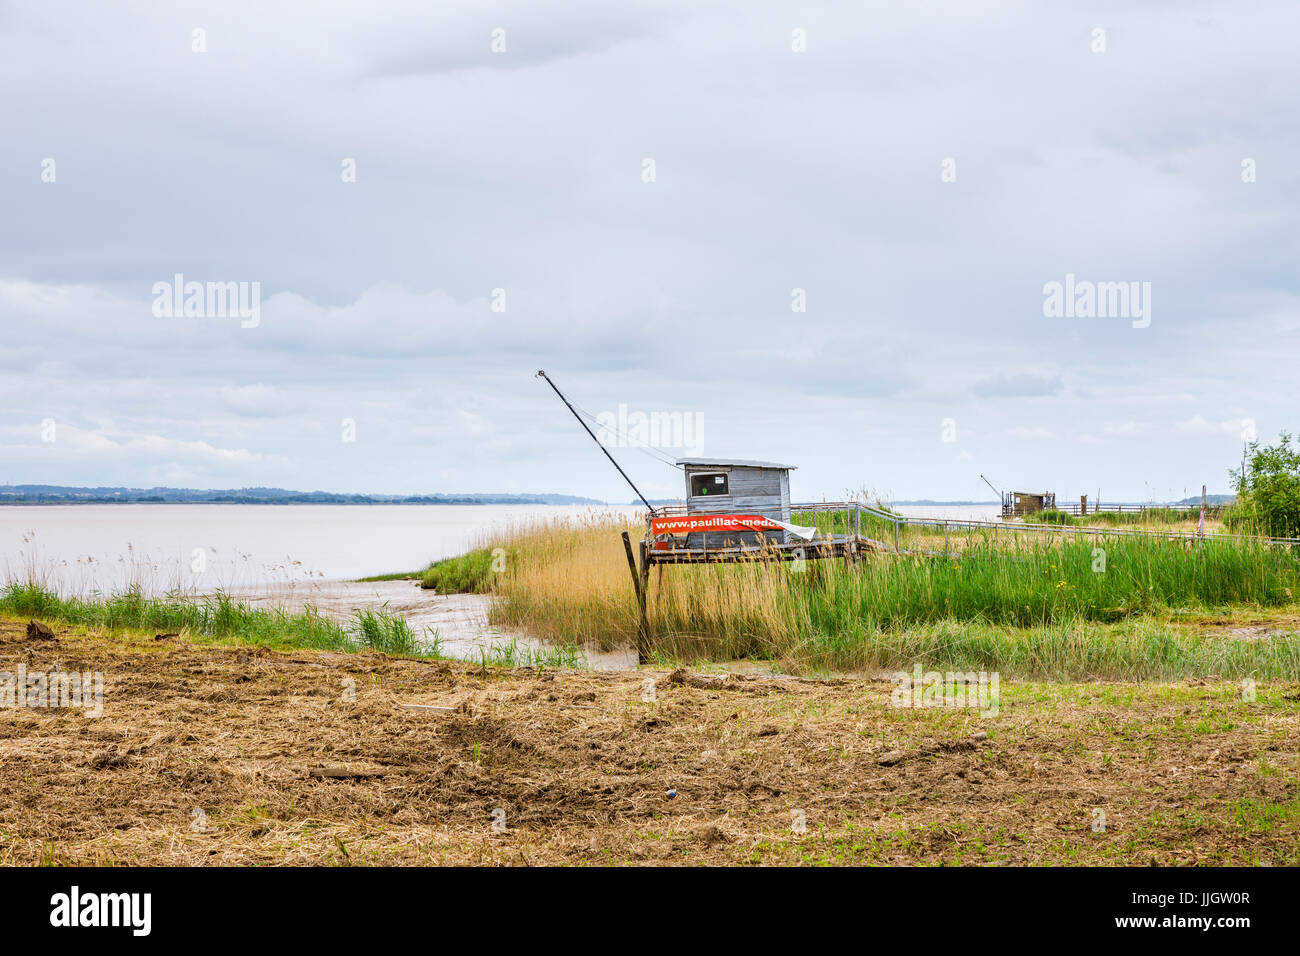 Carrelet, Gironde estuary-side fishing hut on stilts, Pauillac, a municipality in the Gironde department in Nouvelle-Aquitaine in south-western France Stock Photo